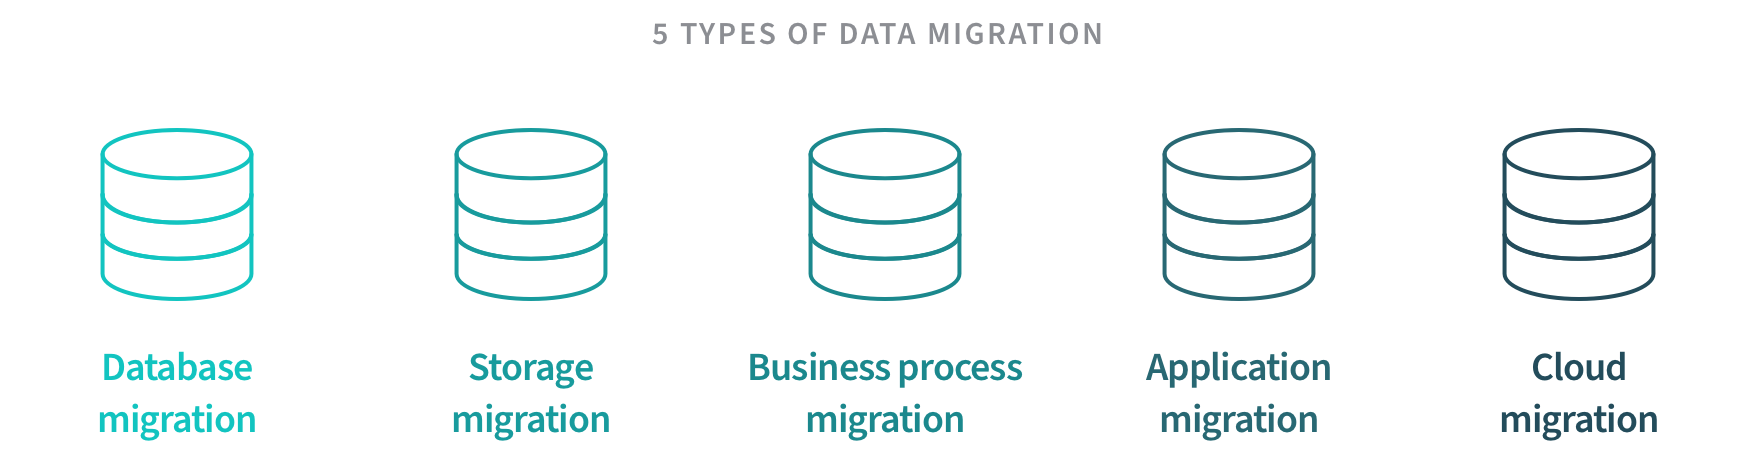 Illustration showing the five types of data migration